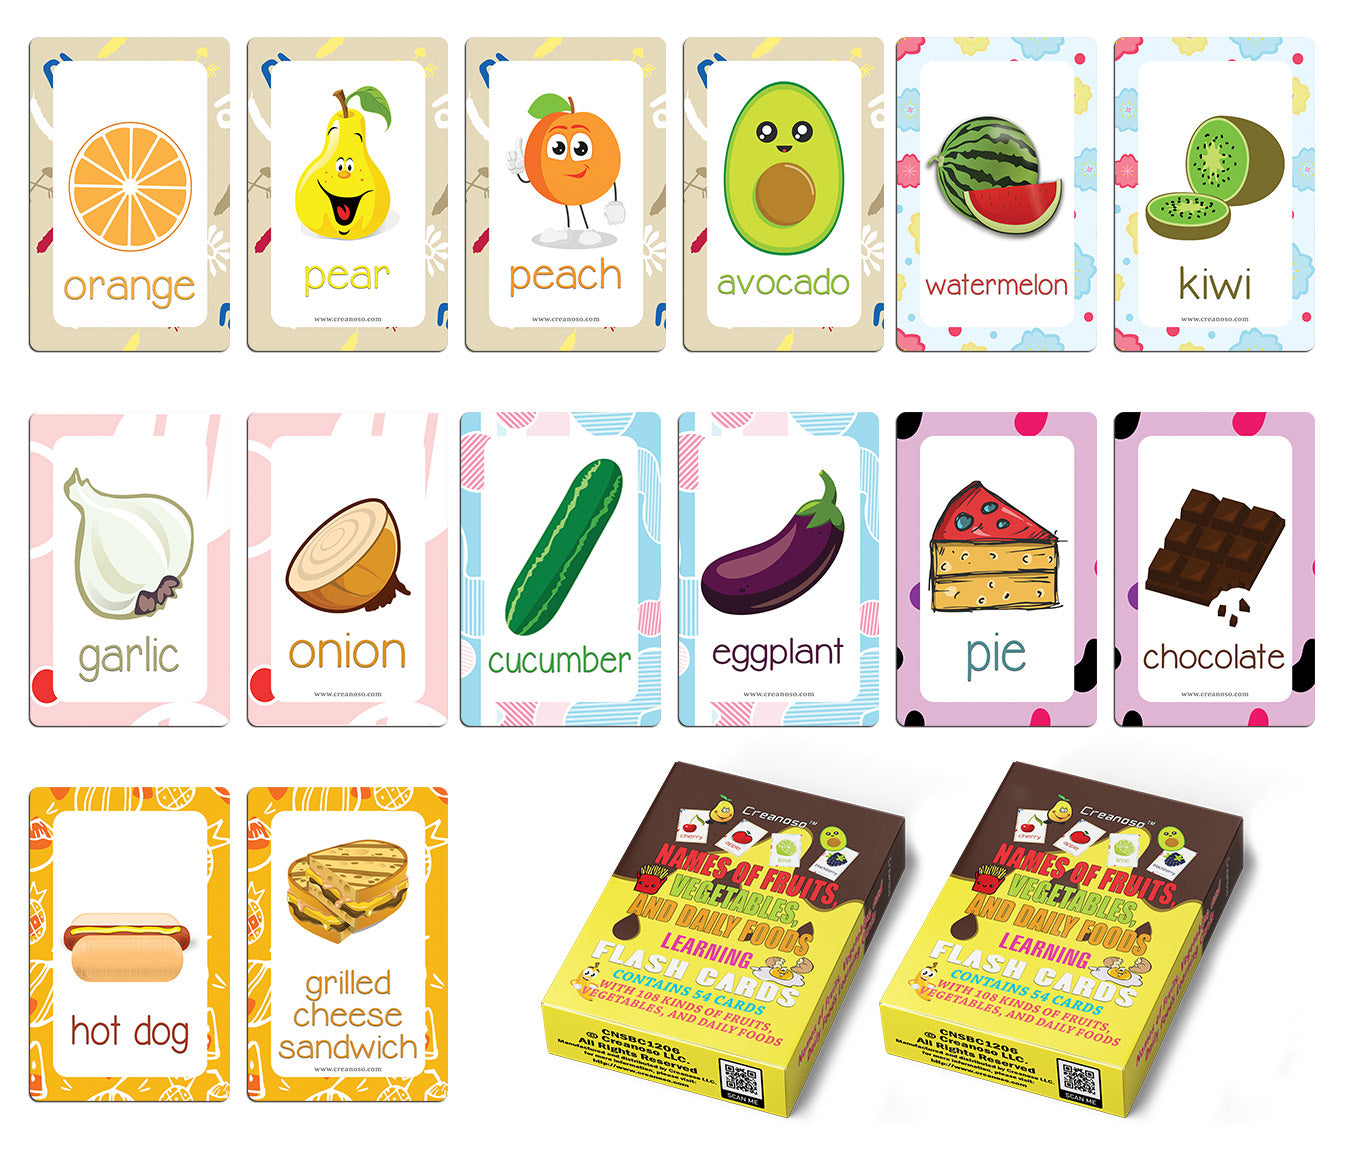 Names of Fruits, Vegetables, and Daily Foods Learning Cards (2-Deck)